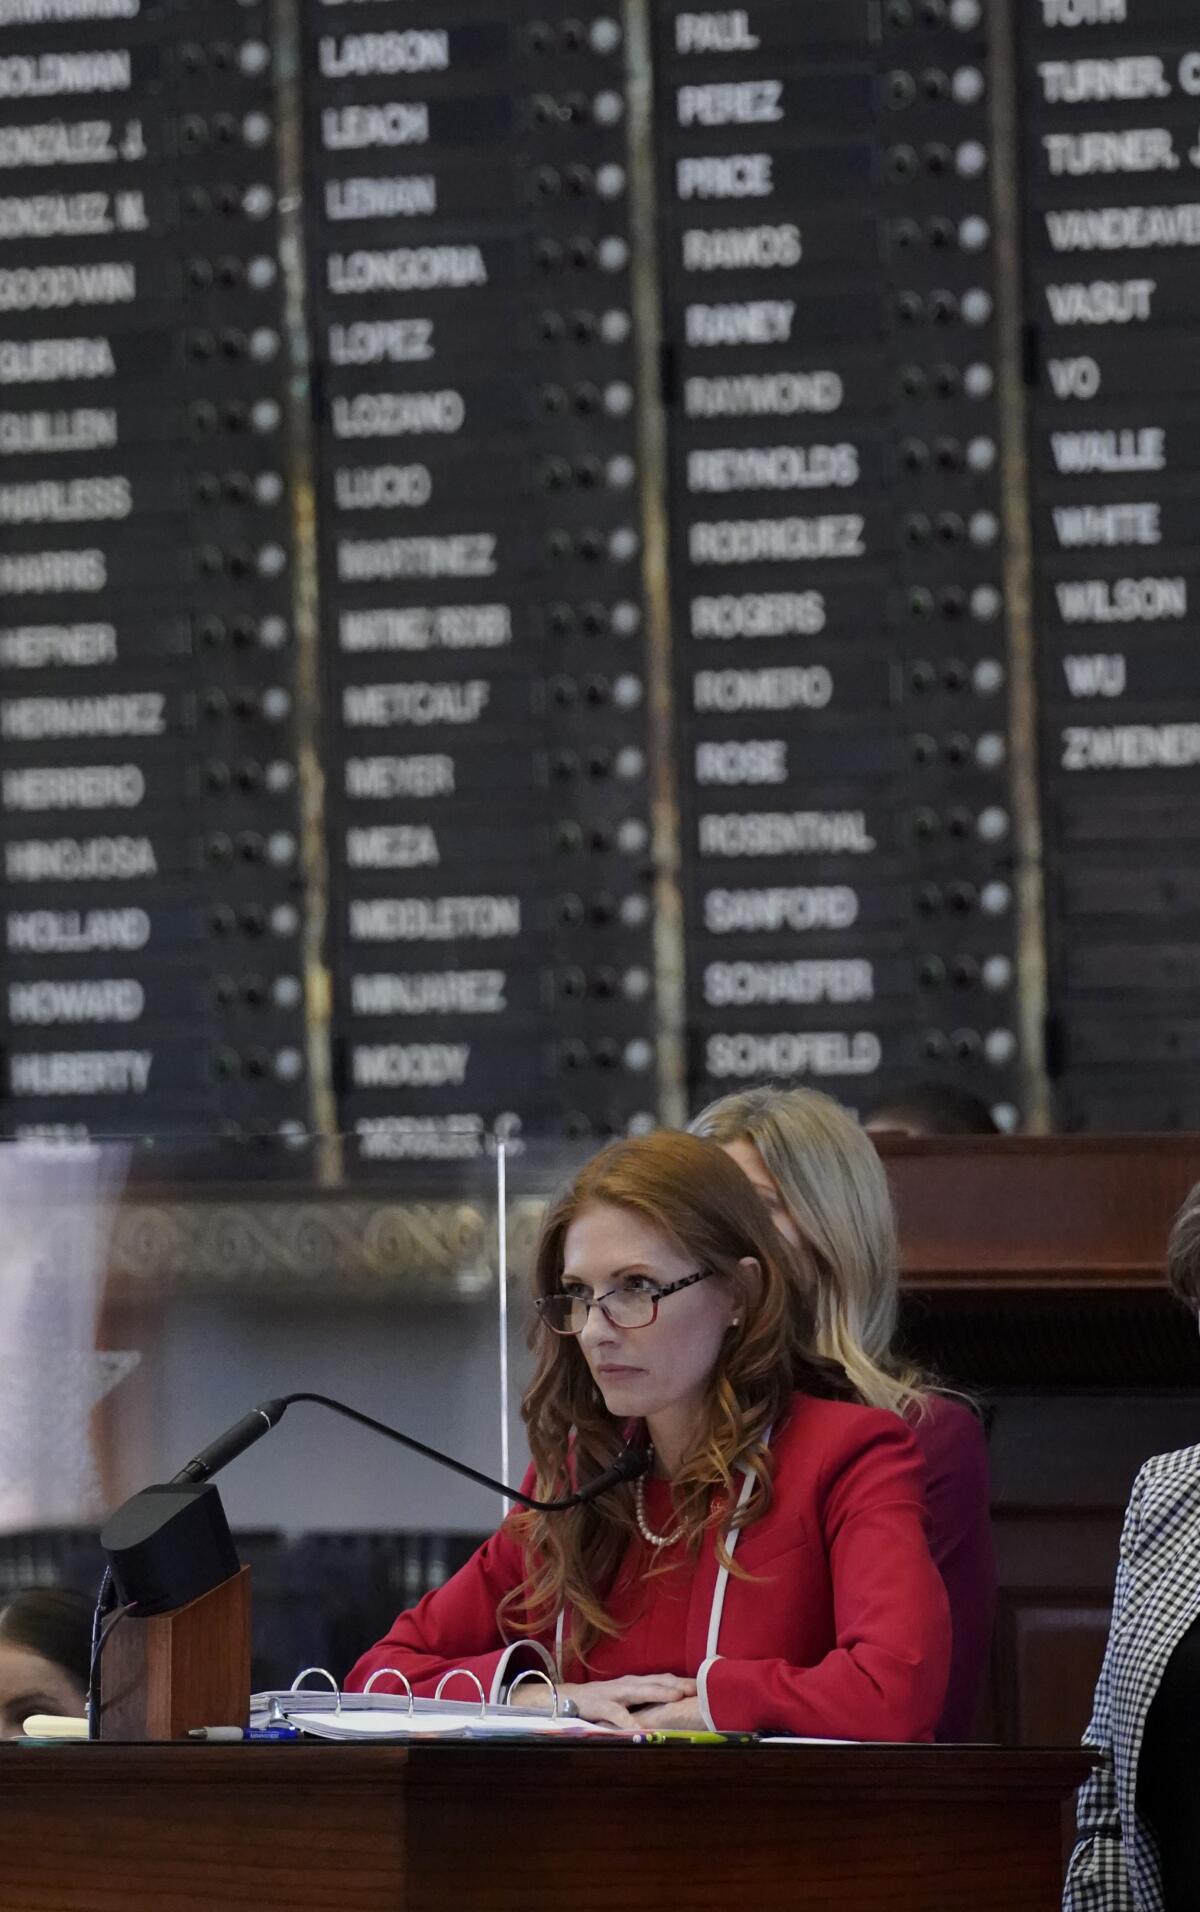 Texas State Rep. Shelby Slawson, R-Stephenville, center, answers questions about a proposed bill in the House Chamber, Wednesday, May 5, 2021, in Austin, Texas. Slawson is co-sponsoring a bill introduced in Texas that would ban abortions as early as six weeks and allow private citizens to enforce it through civil lawsuits, under a measure given preliminary approval by the Republican-dominated state House on Wednesday. The move would have Texas join about a dozen other Republican-led states to pass so-called "heartbeat bills" which have been mostly blocked by federal courts. (AP Photo/Eric Gay)